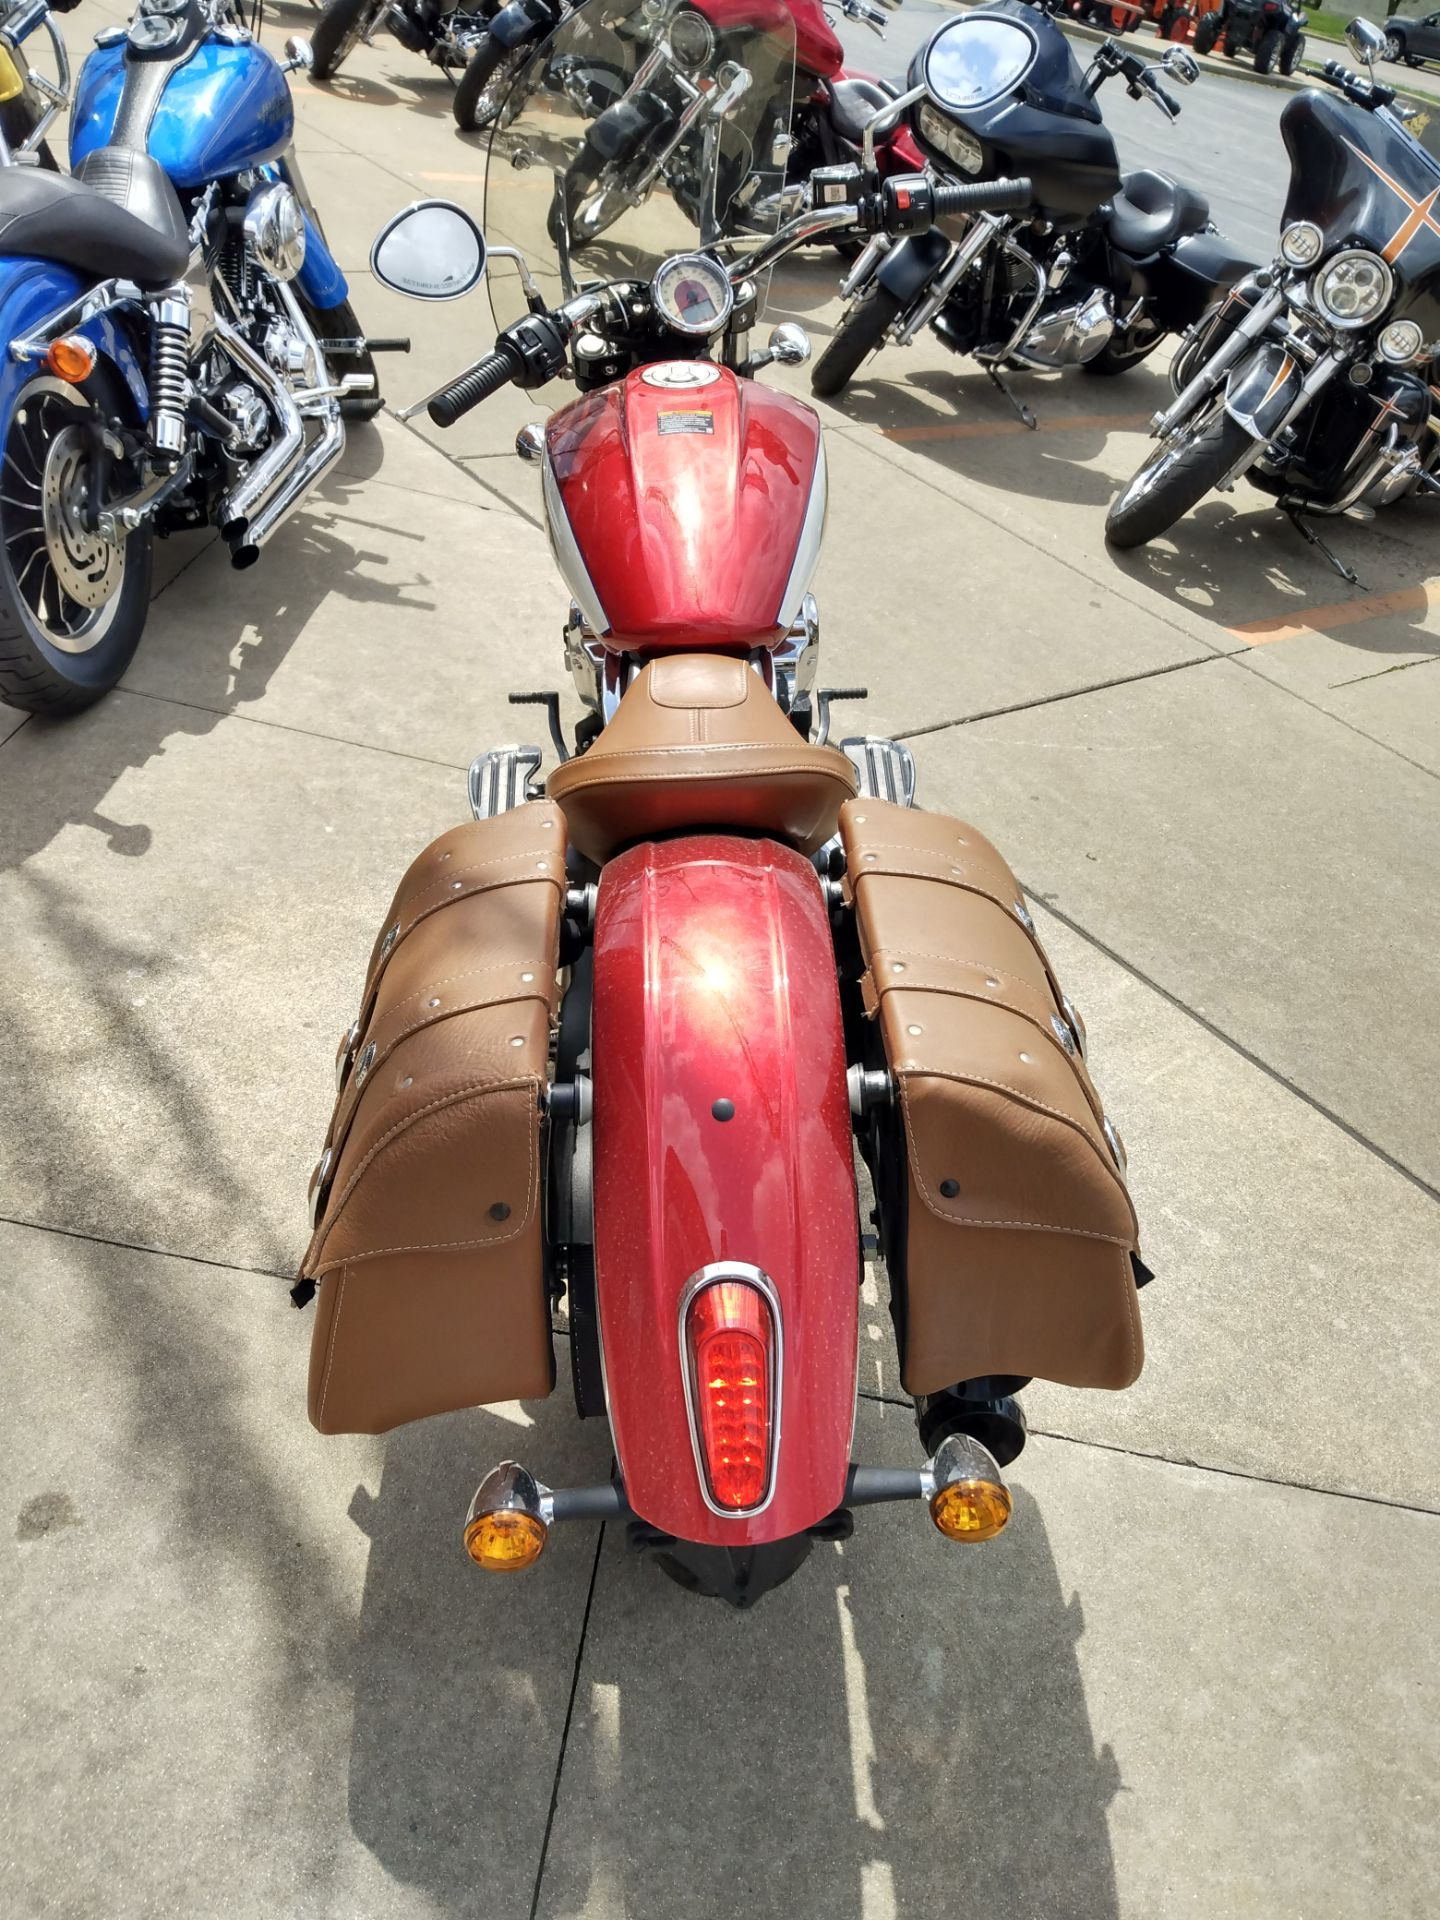 2019 Indian SCOUT ICON BOBBER in Marion, Illinois - Photo 1